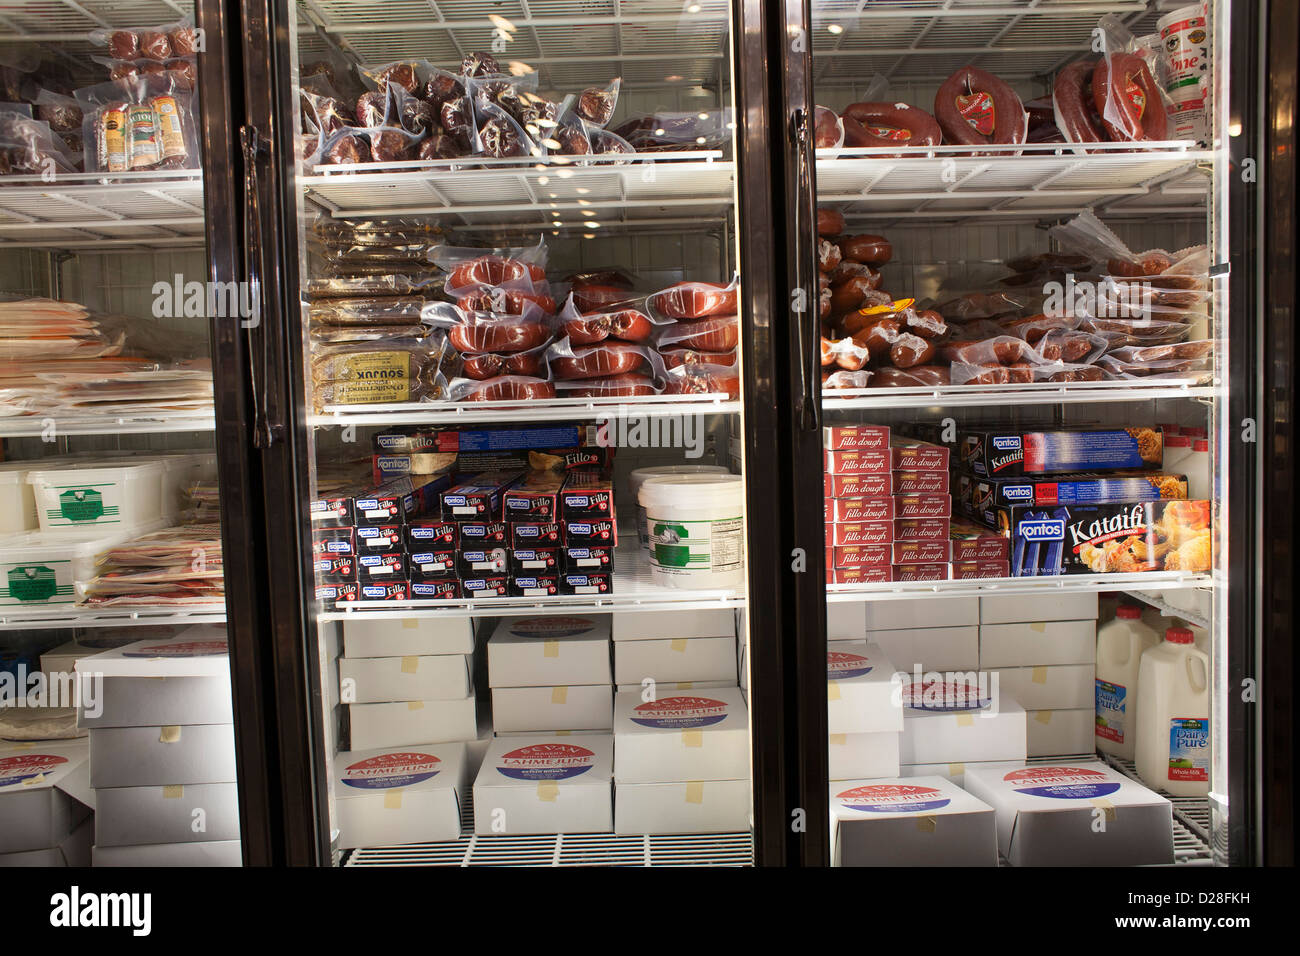 The refrigerated case in a Middle Eastern deli in Watertown, Massachusetts has a wide variety of products. Stock Photo